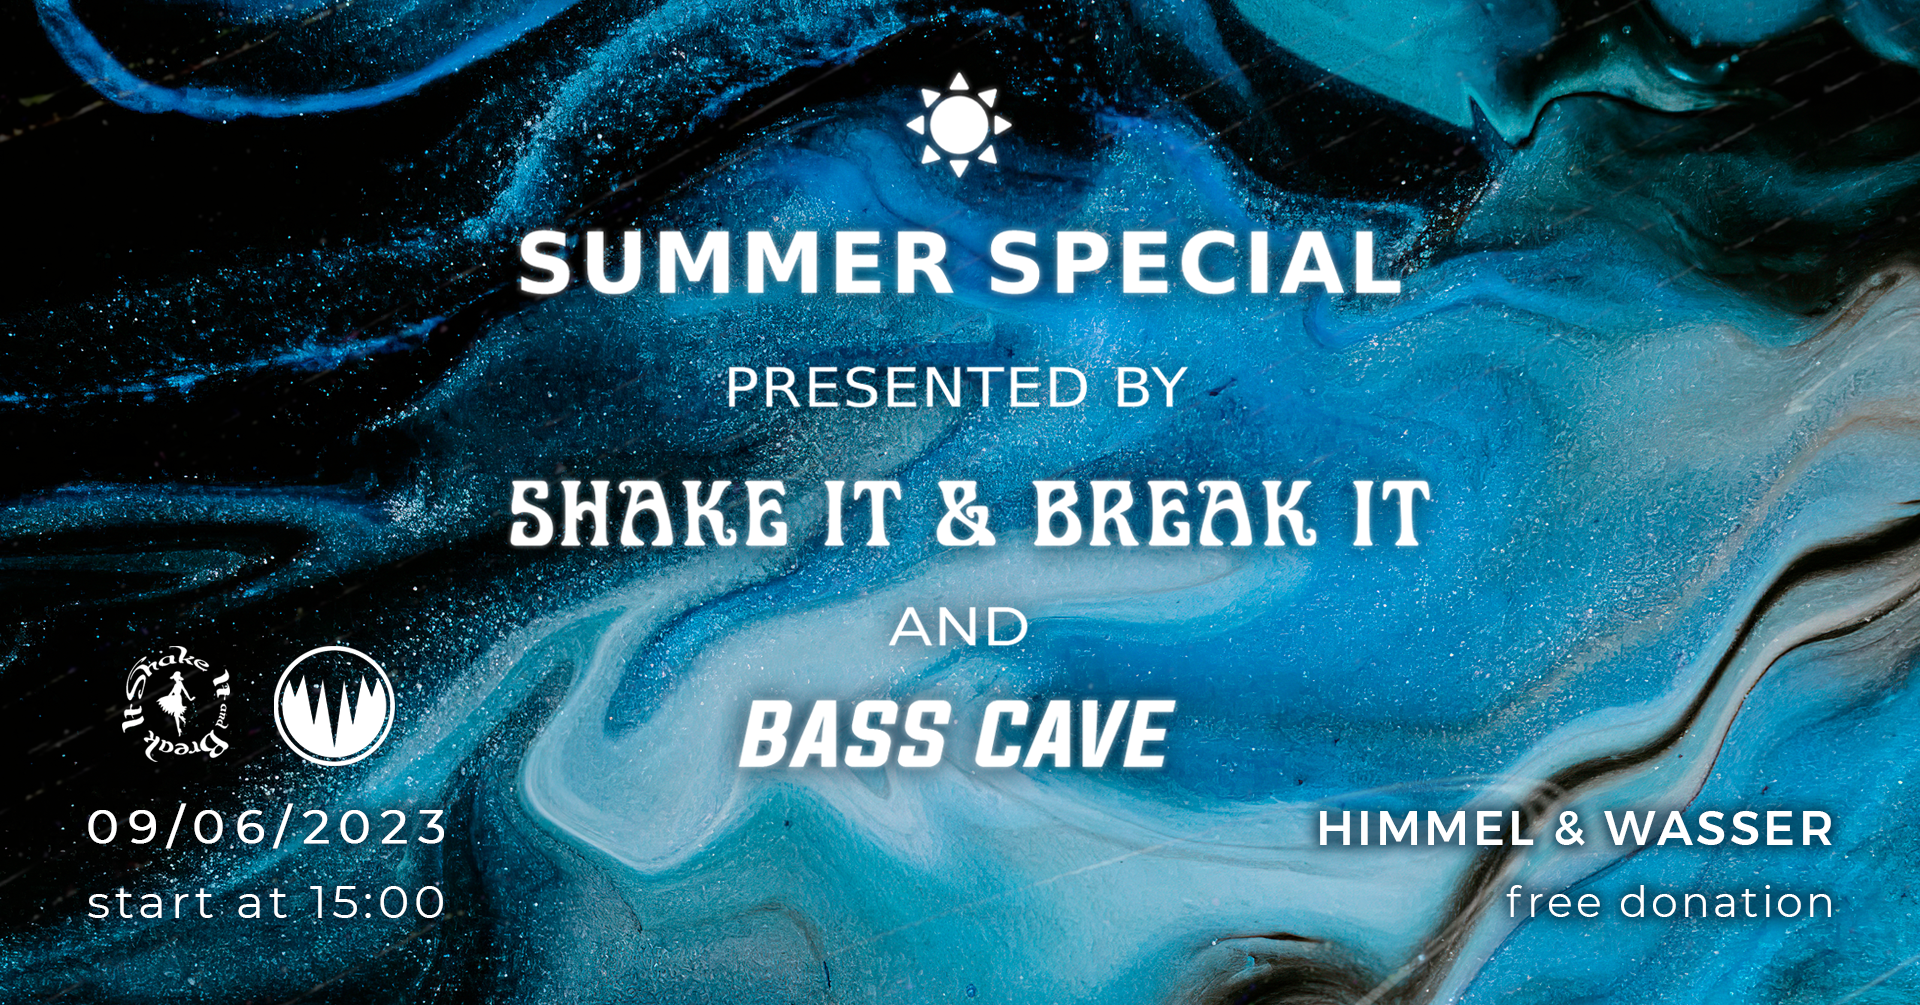 Bass Cave & Shake it and Break it - Summer Special ☼ am 9. June 2023 @ Donauinsel Wien.